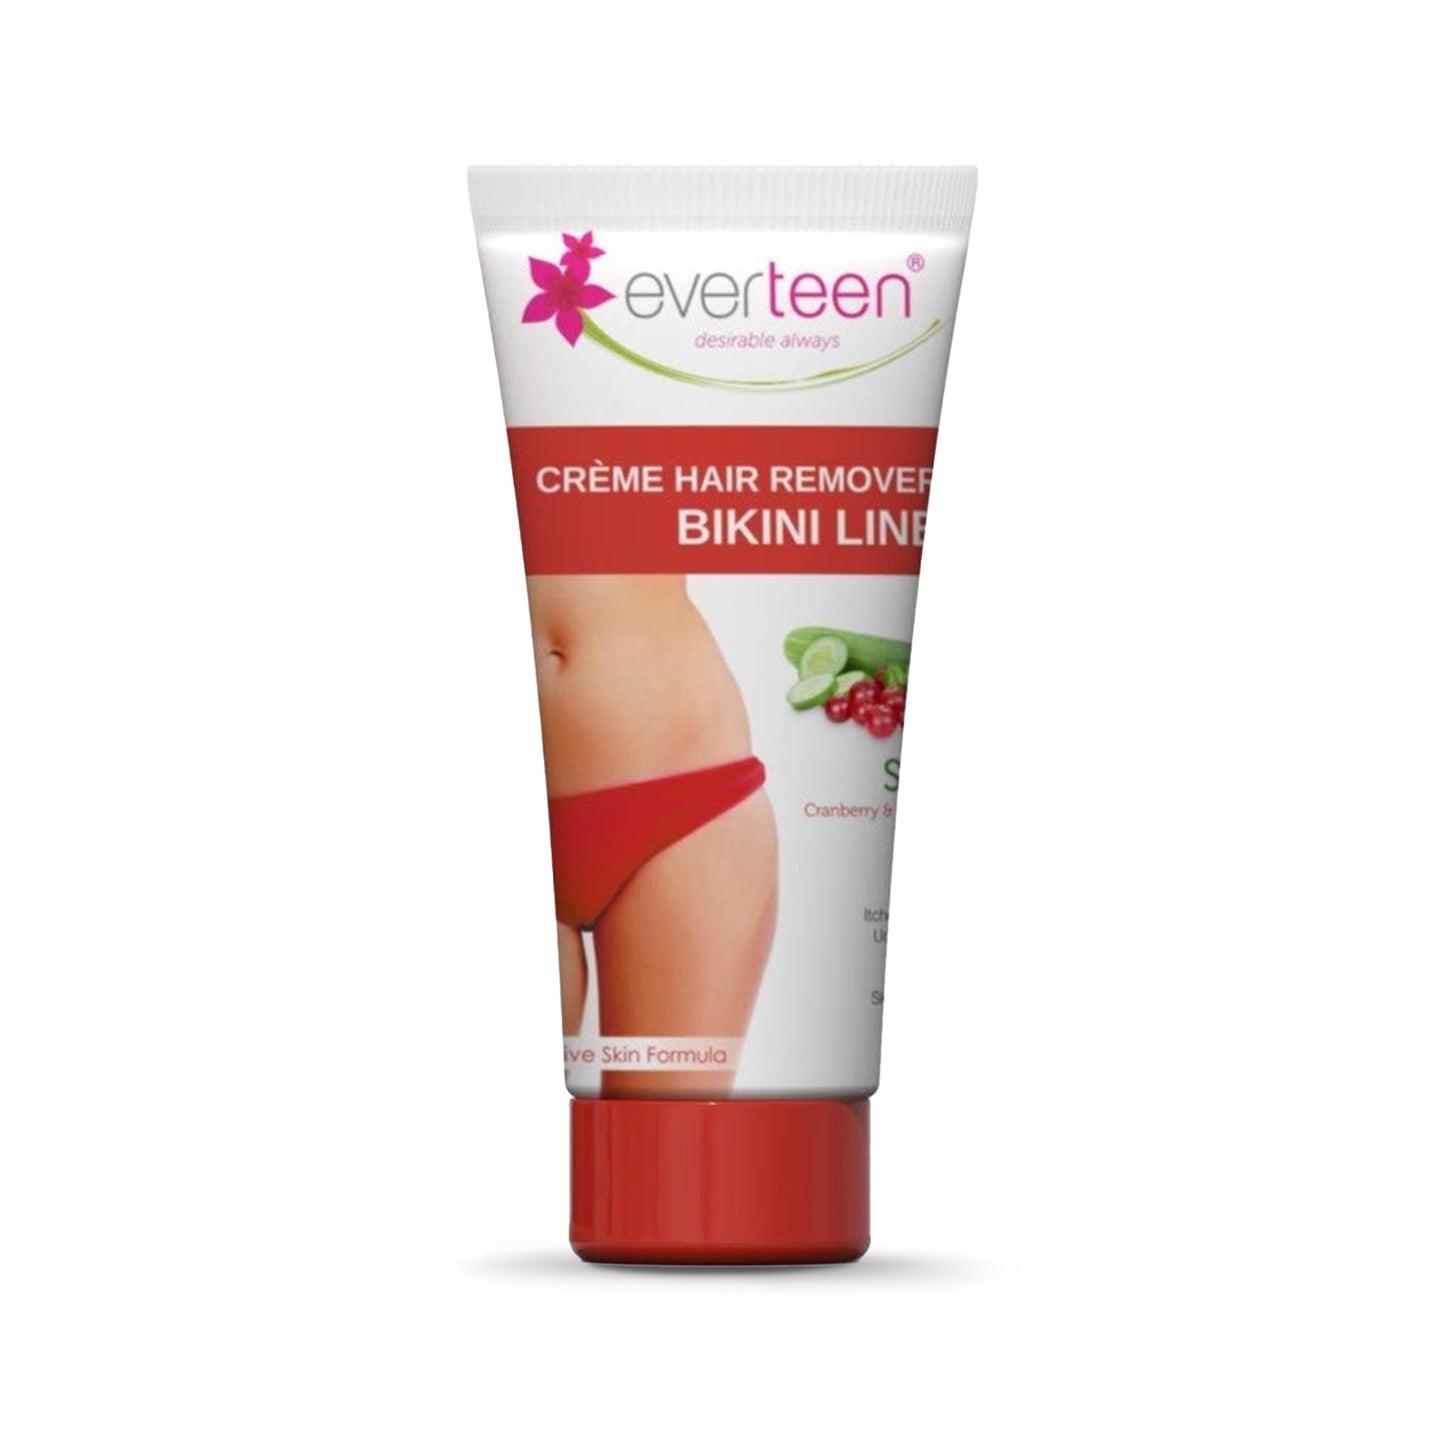 Everteen Silky Bikini Line Hair Remover Creme with Cranberry and Cucumber, 50gm